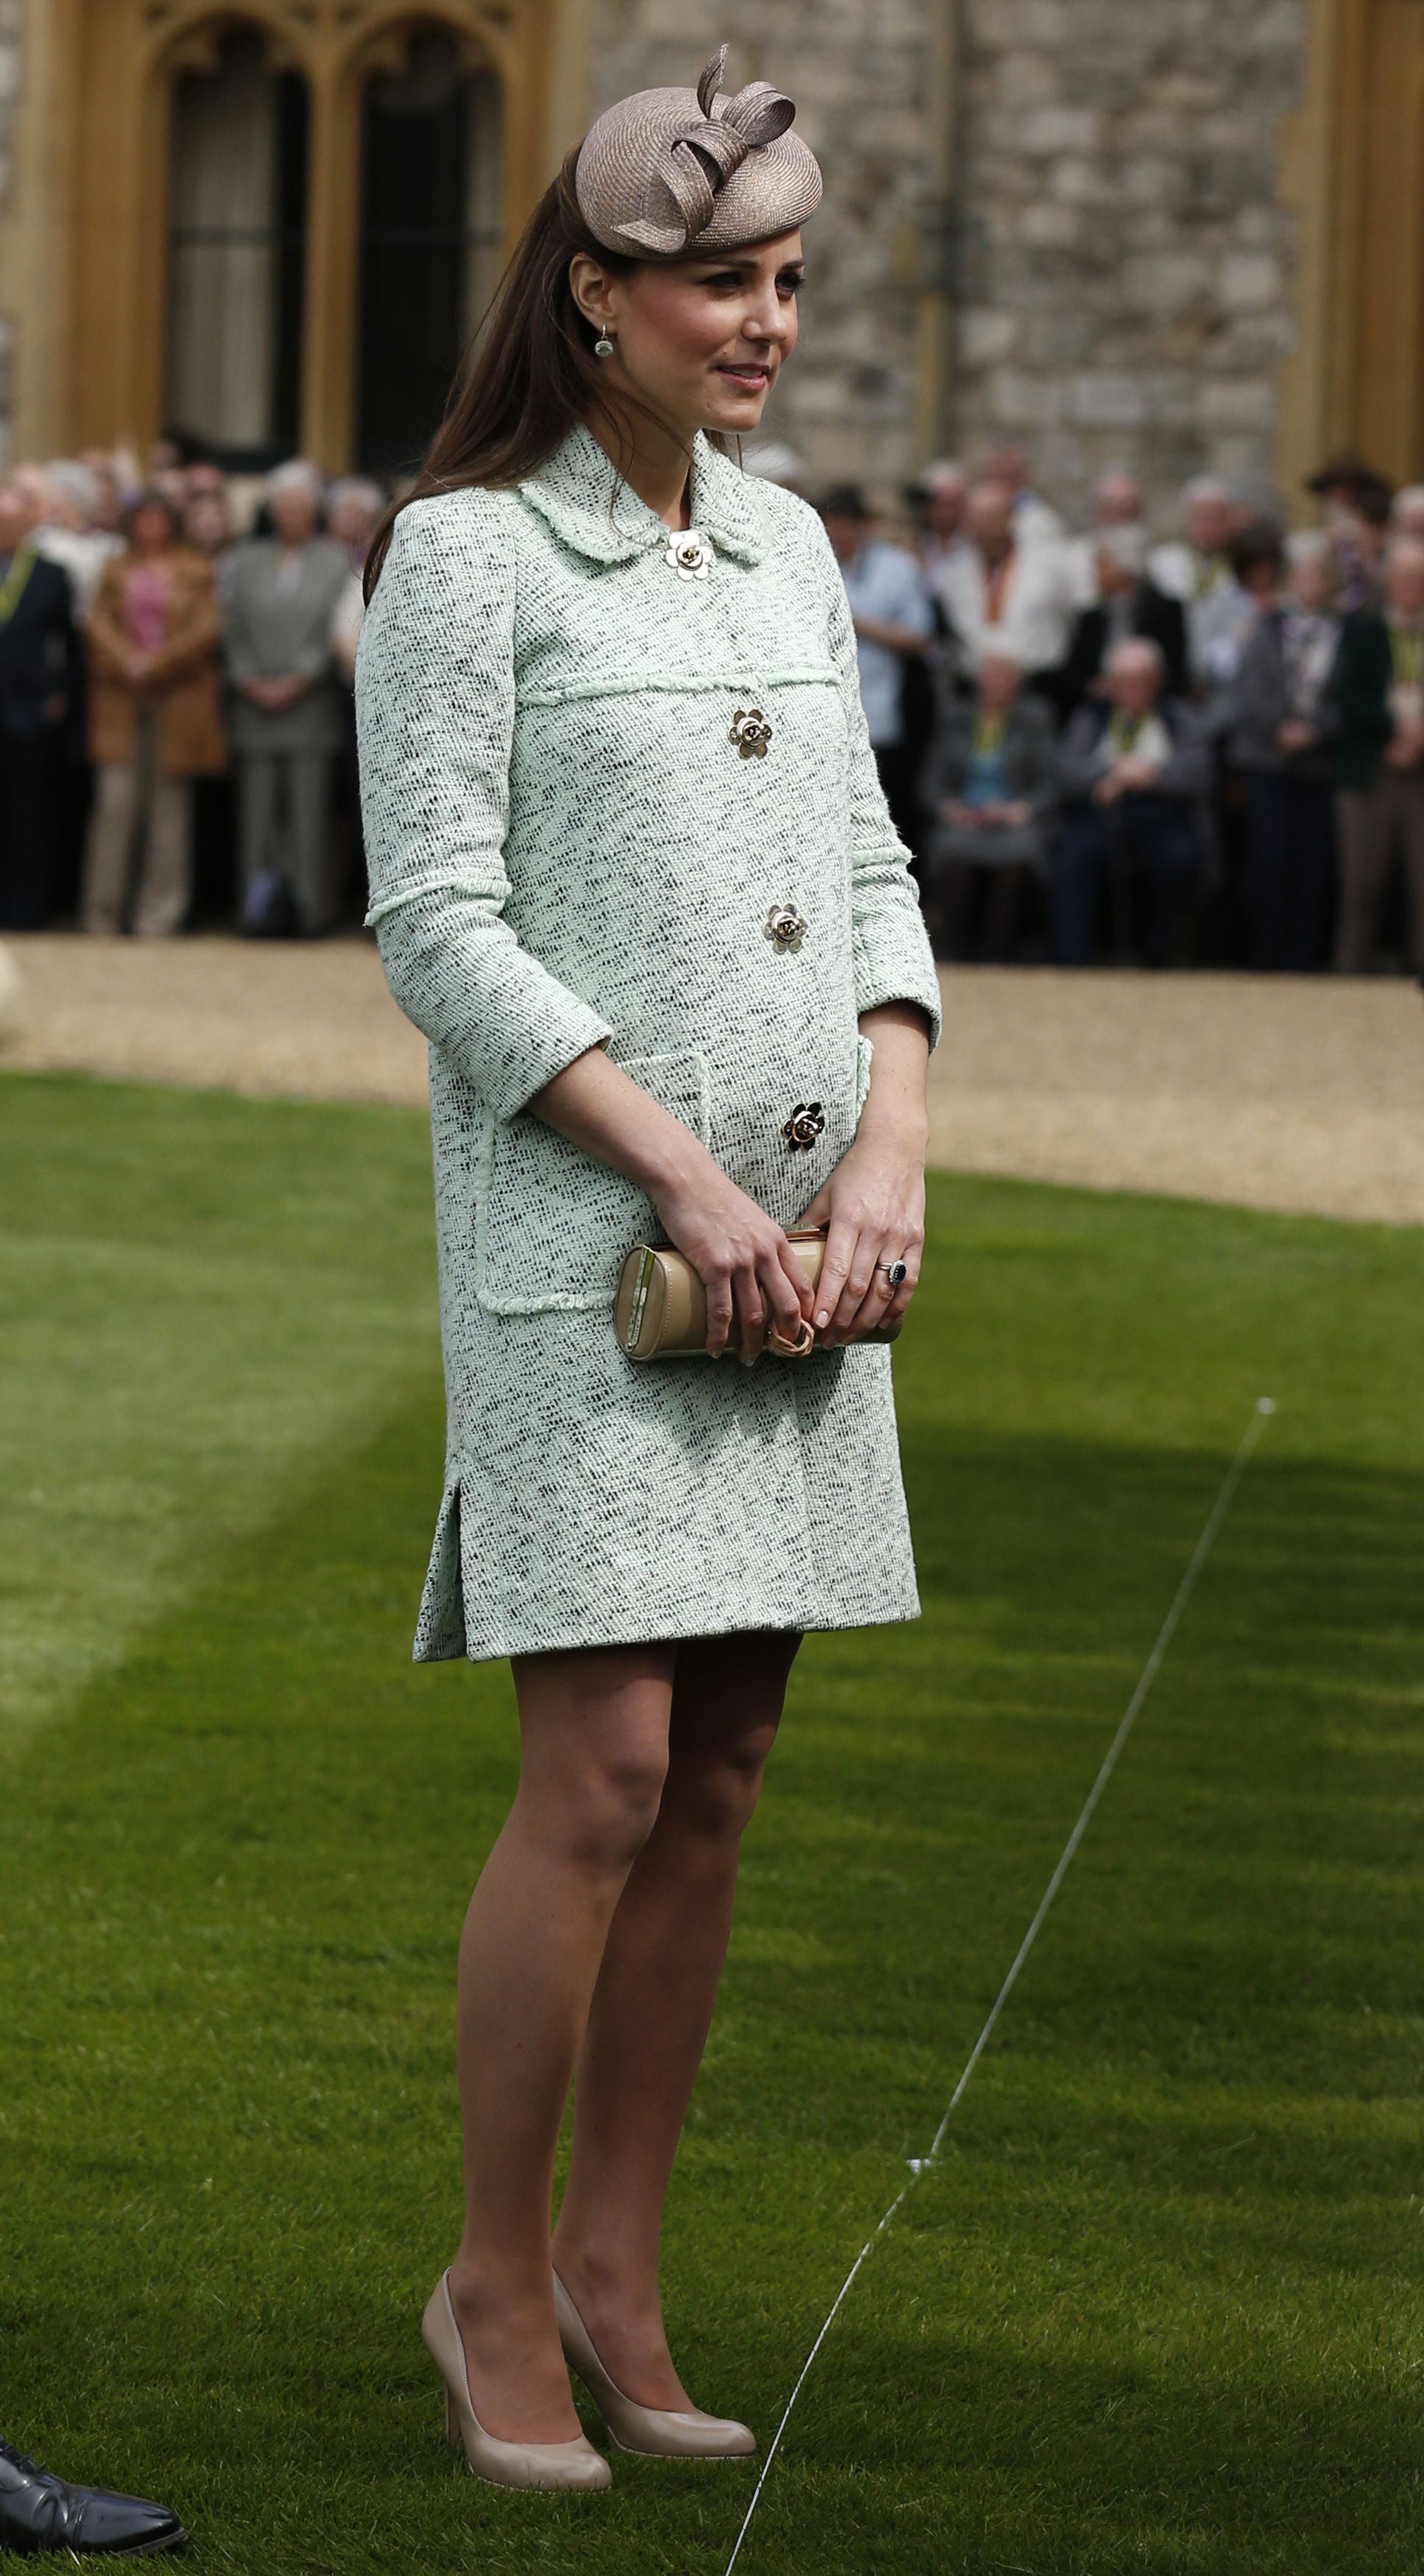 Kate Middleton, Duchess of Cambridge during the National Review of Queen's Scouts at Windsor Castle on April 21, 2013. / Source: Getty Images